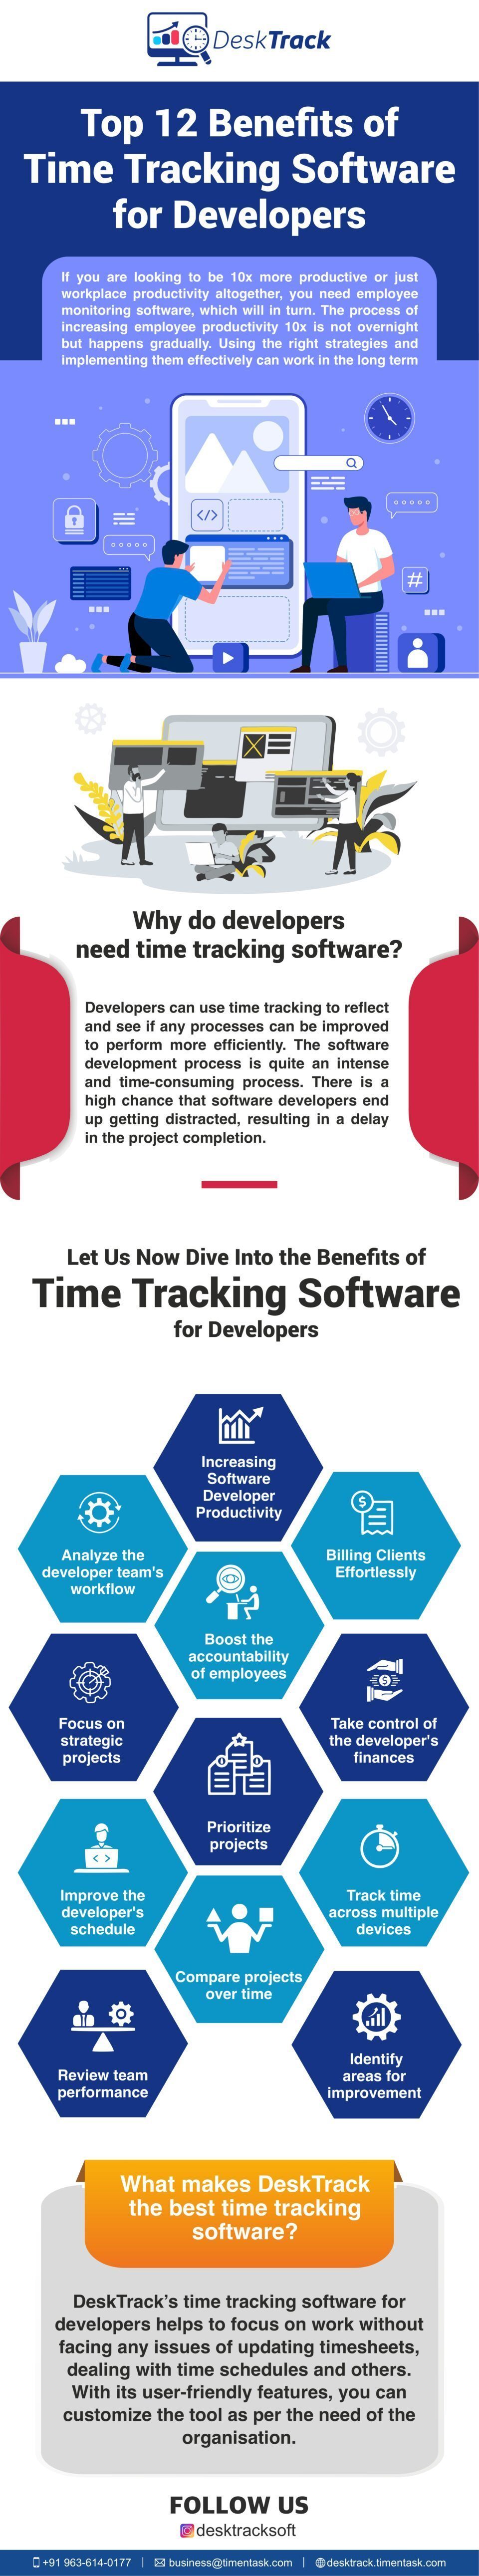 Top 12 Benefits of Time Tracking Software For Developers